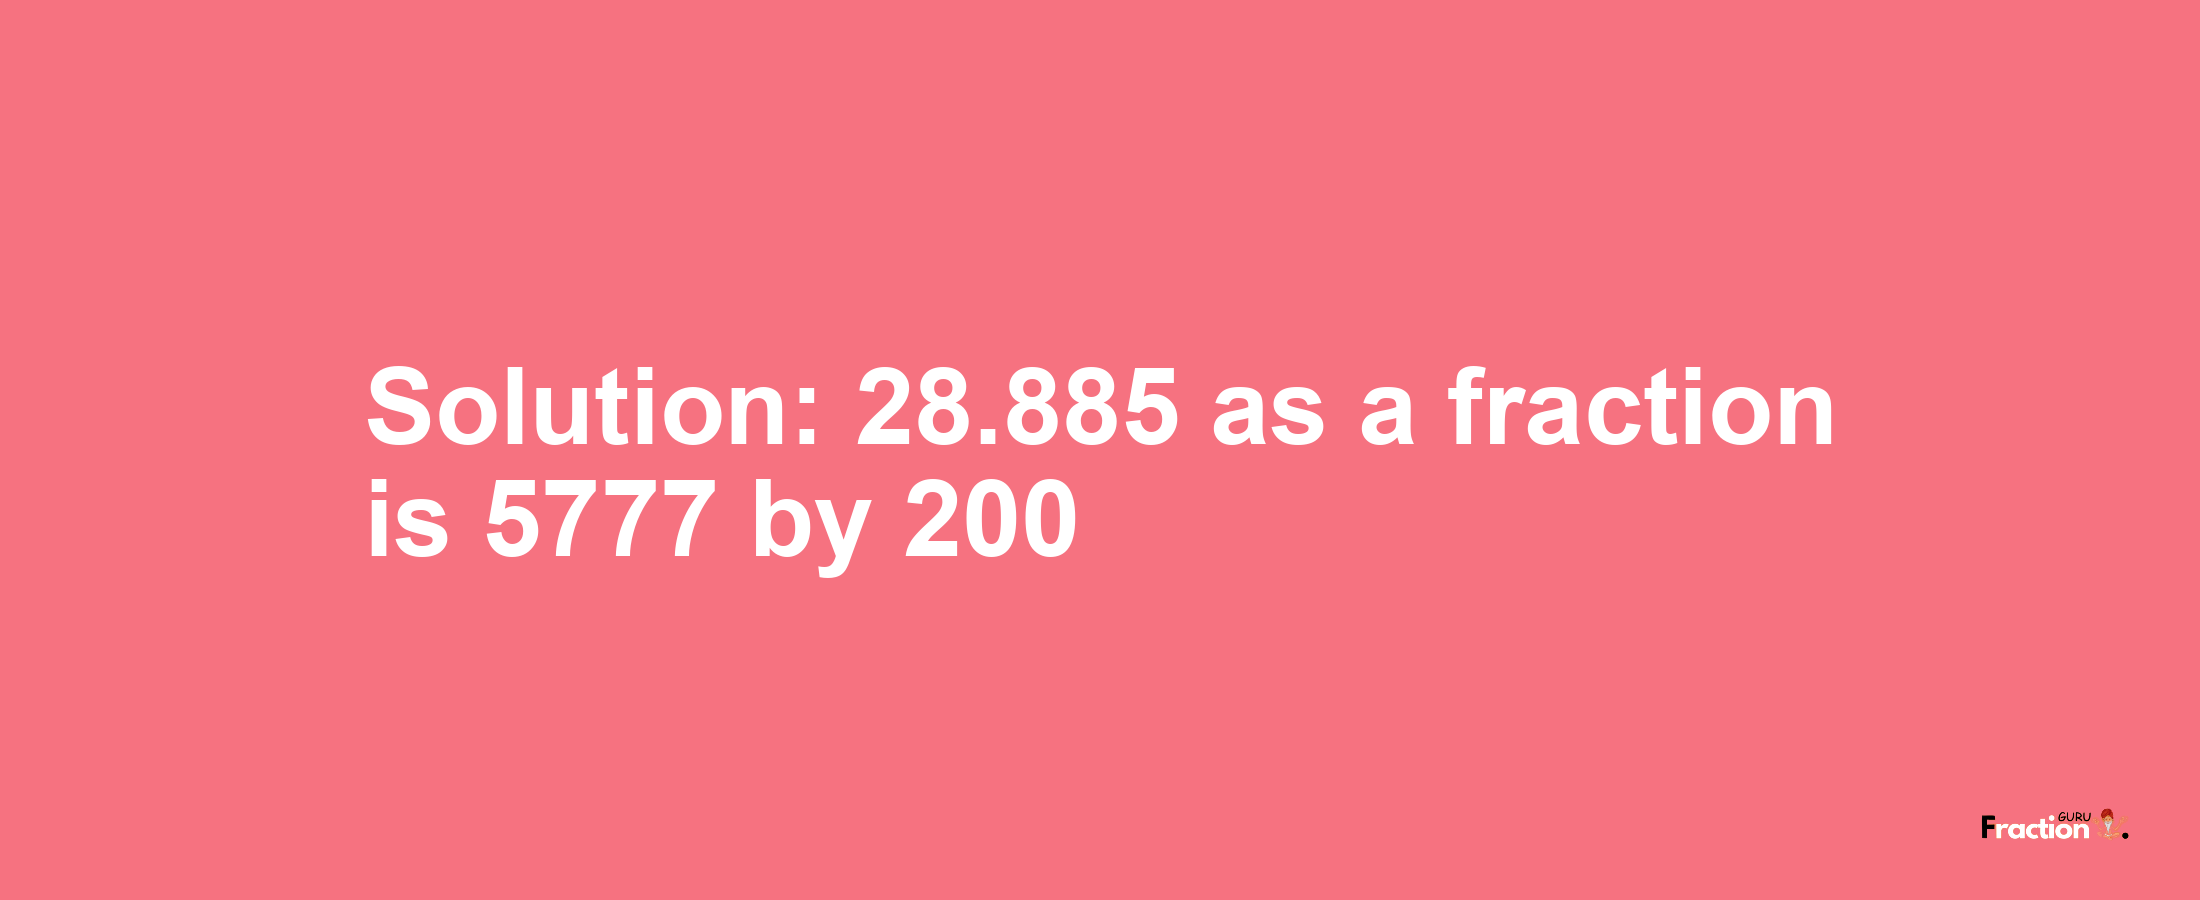 Solution:28.885 as a fraction is 5777/200